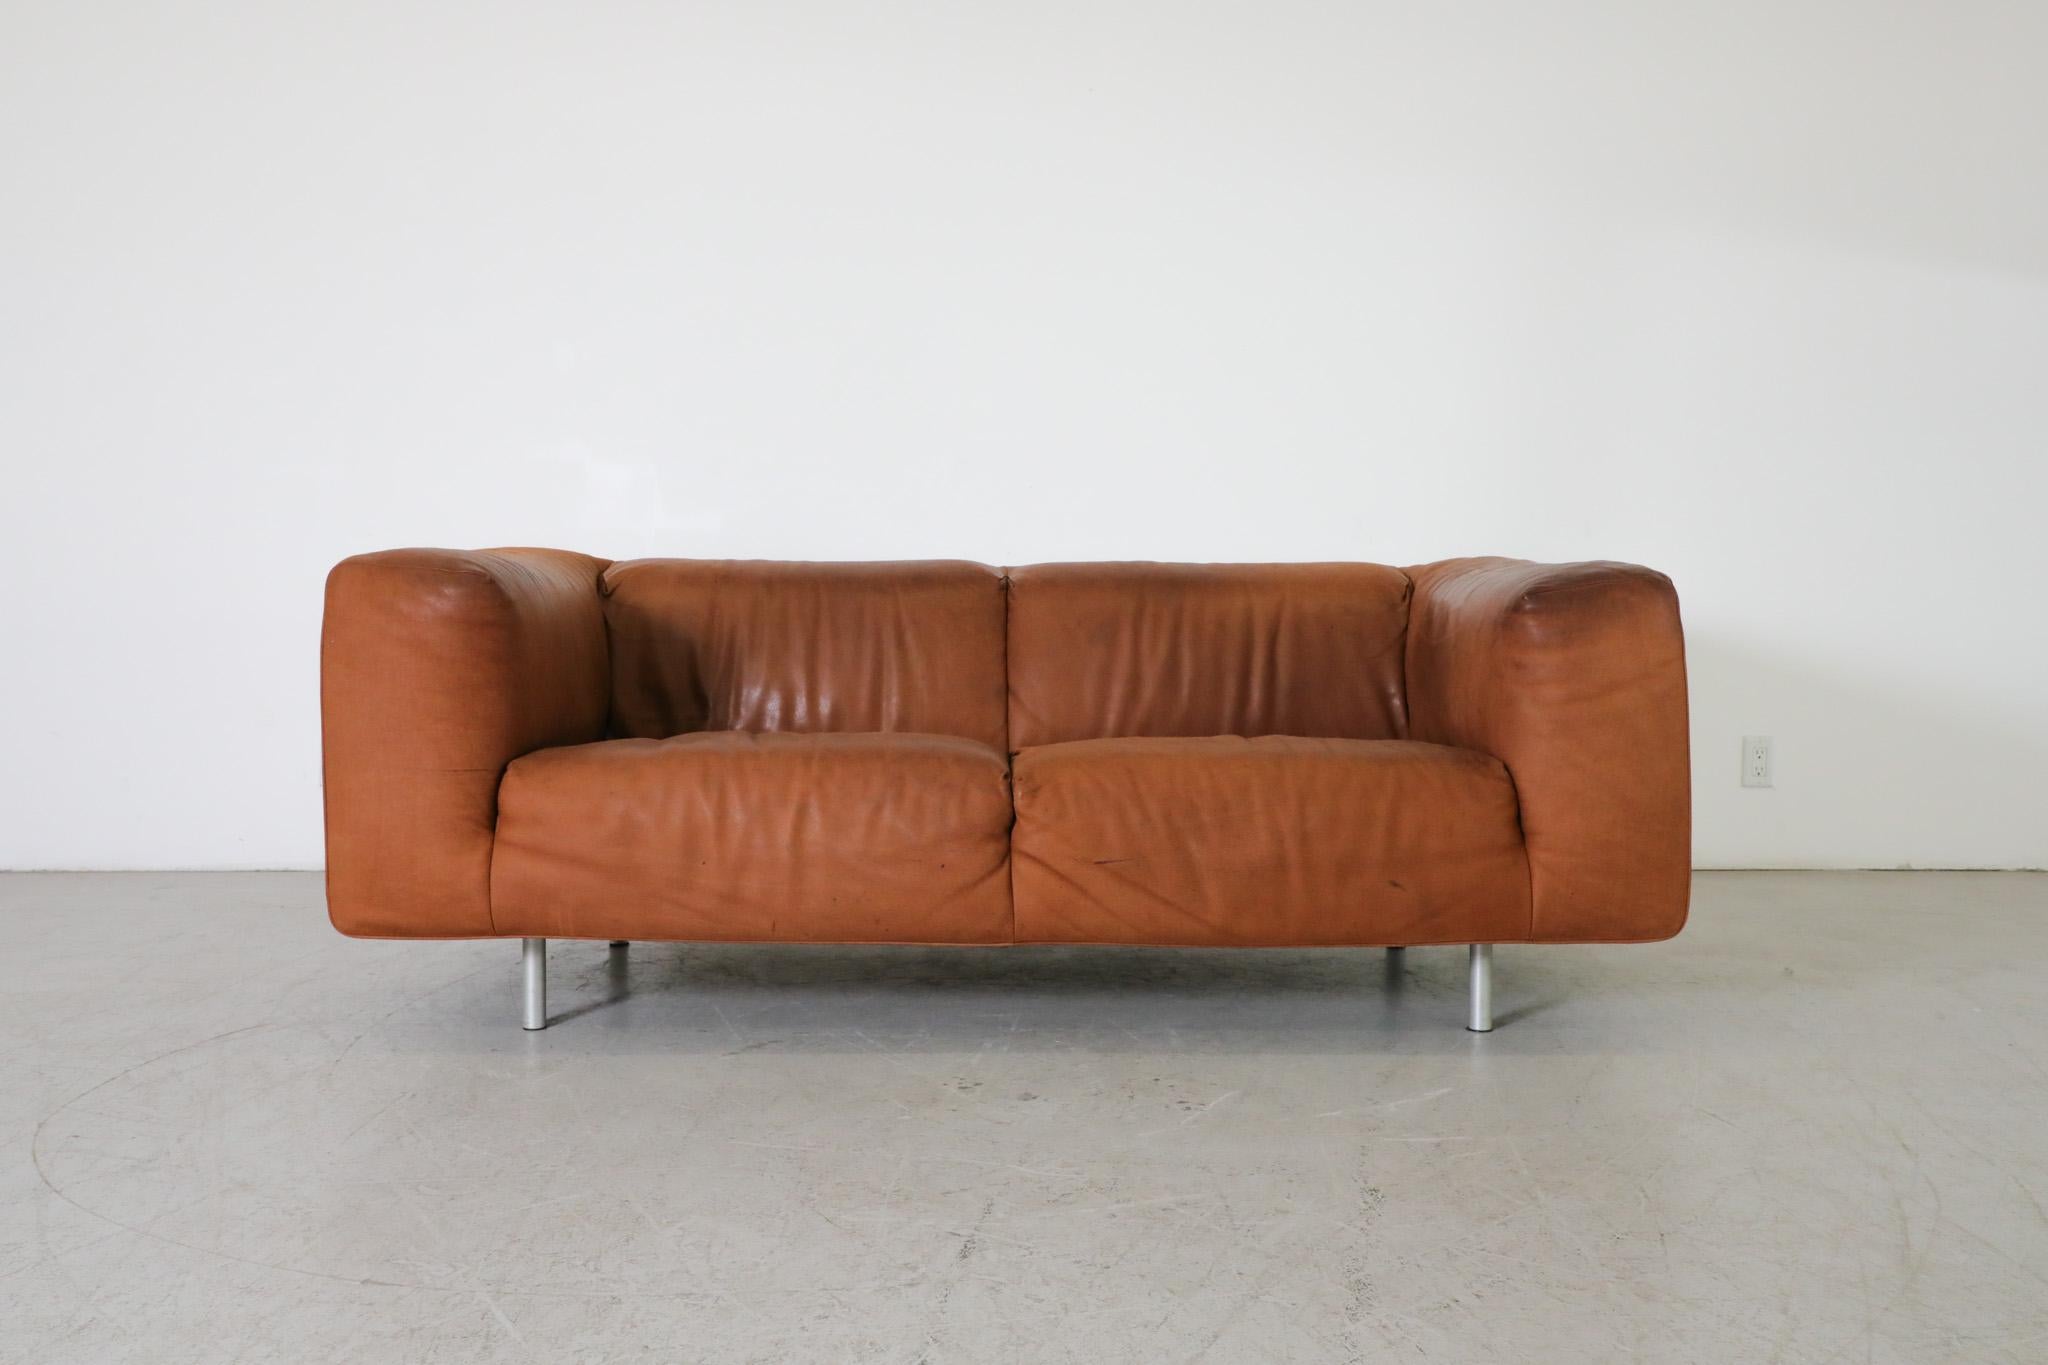 Handsome Cognac leather sofa with aluminum chrome legs by Gerard van den Berg. A comfortable Soft structure leather sofa with some visible wear and patina. Some visible staining and sun fading as well as some loose stitching on the right top corner.